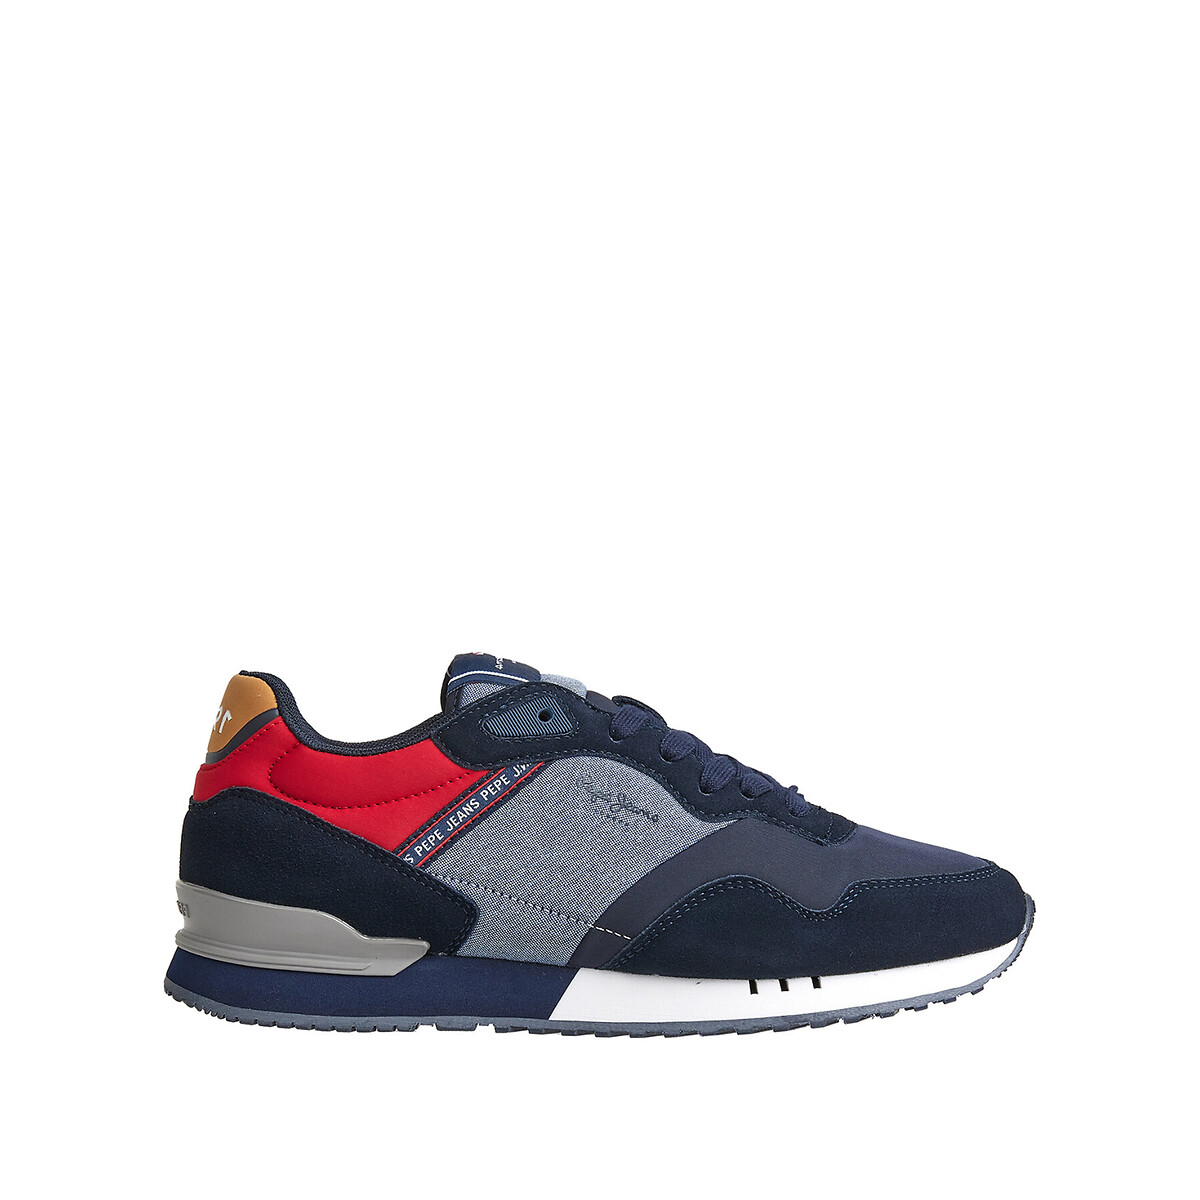 Sneakers London One von Pepe Jeans